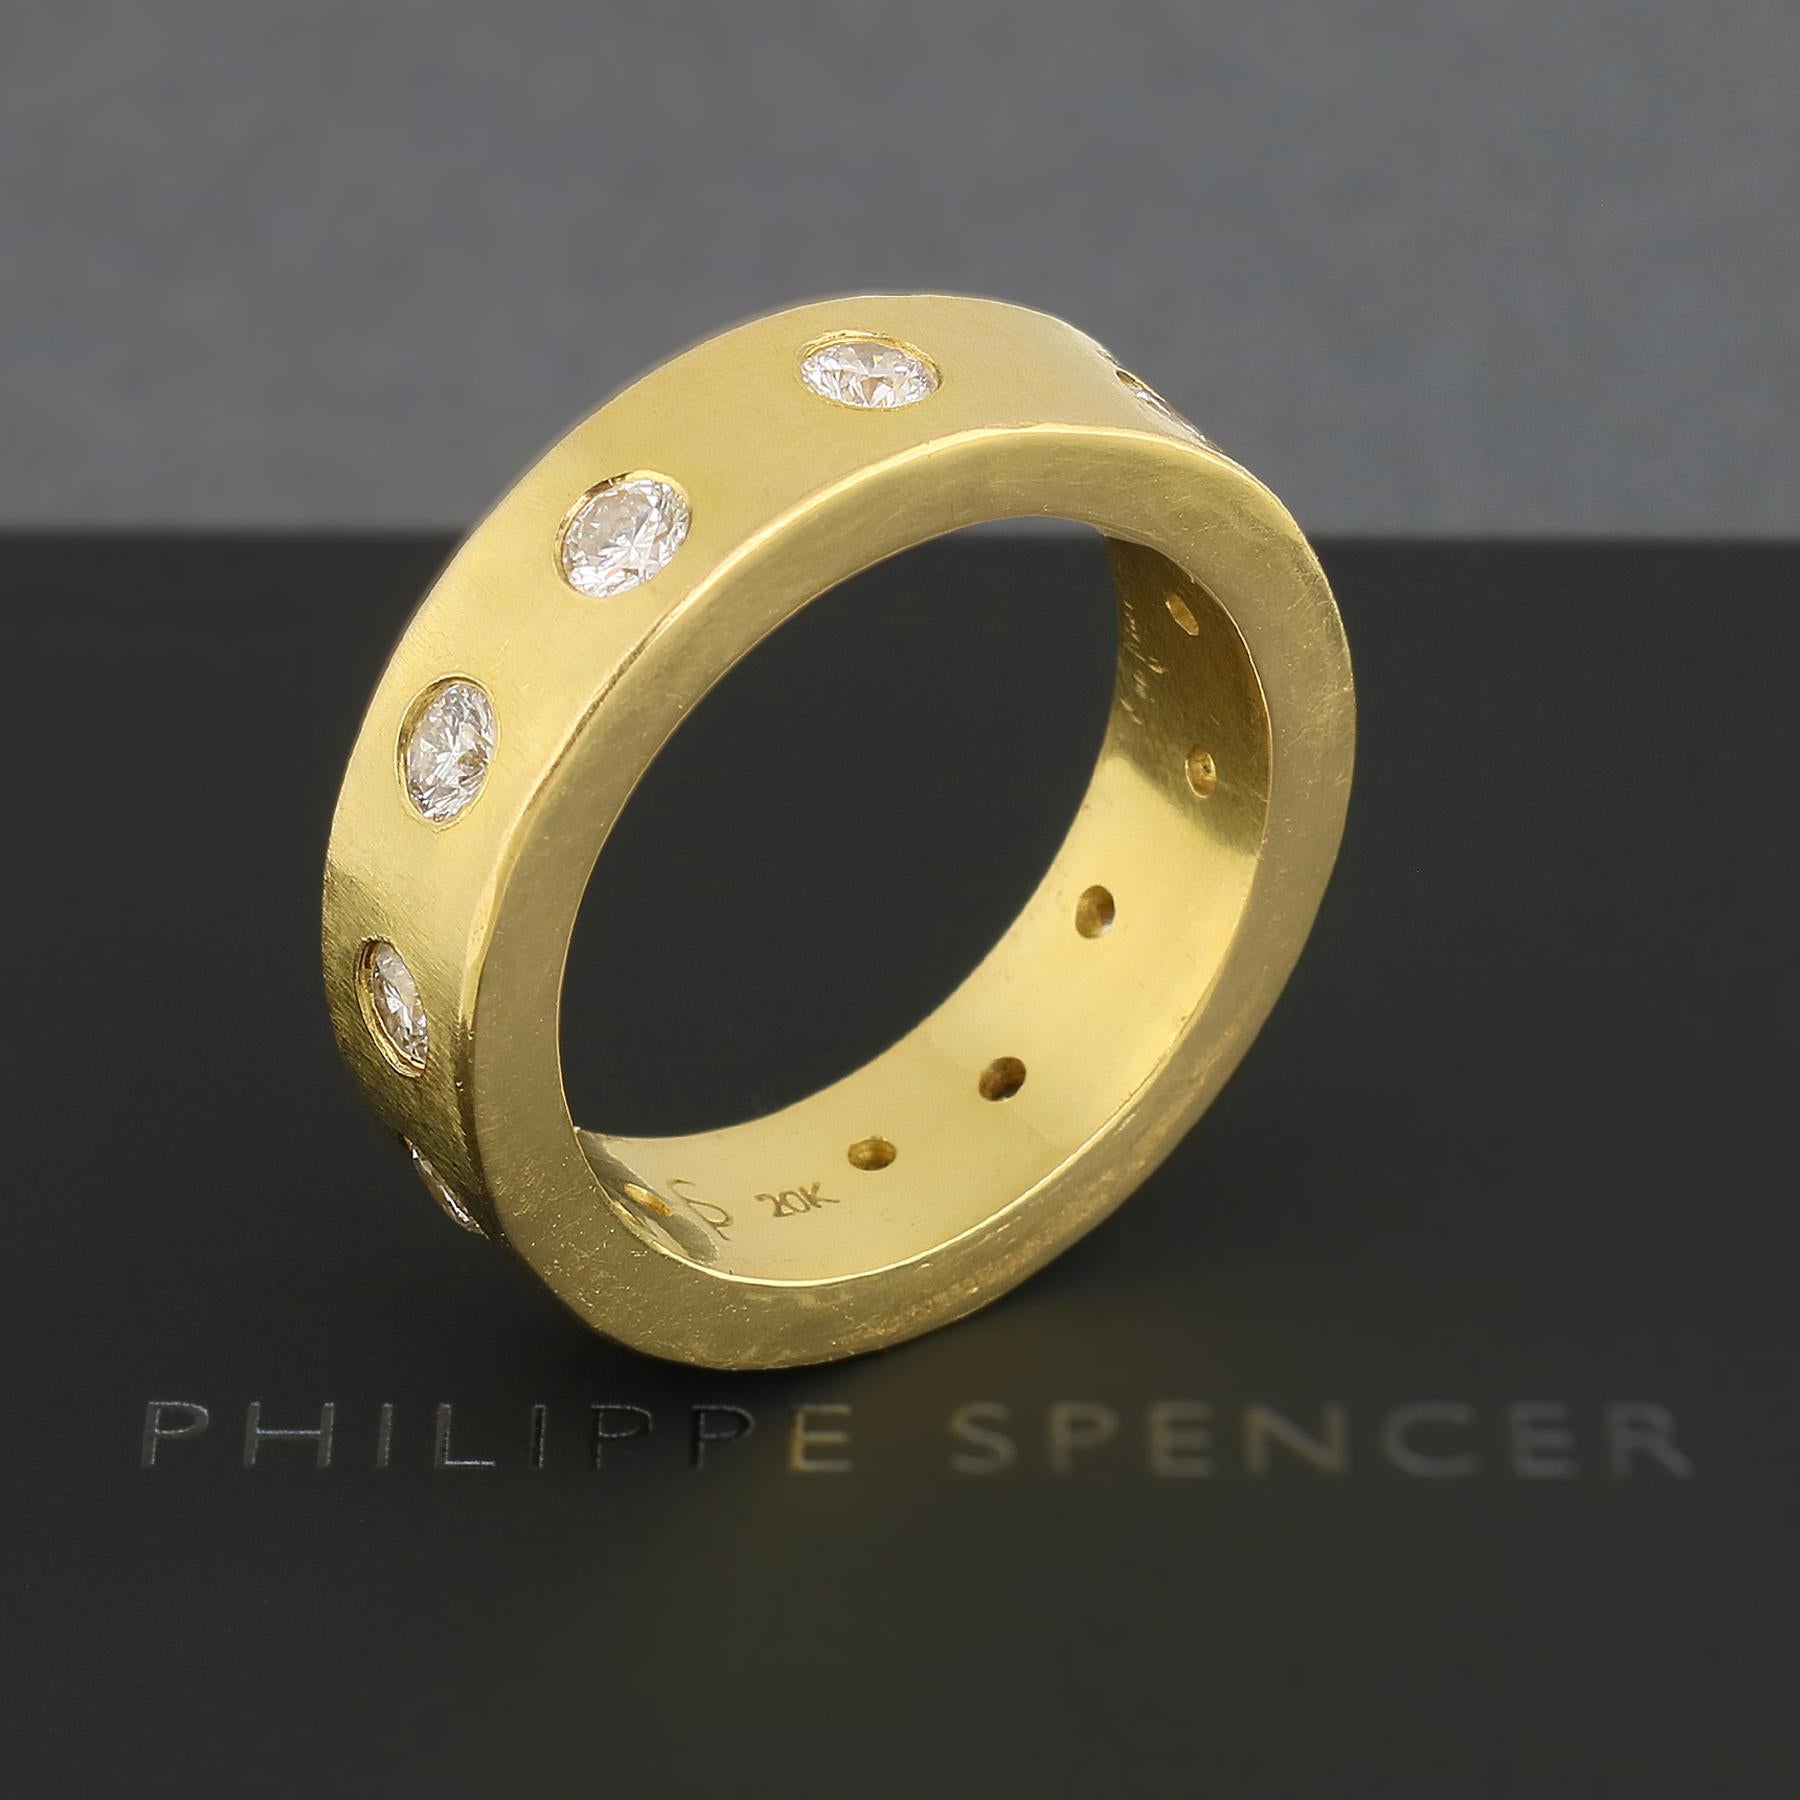 PHILIPPE SPENCER - Men's 8 X 3mm Solid 20K Gold Completely Hand -Forged Statement Ring with 12 Colorless (D-F)  3.5mm ( 2.16 Ct Total) Diamonds. Heavy Matte Anvil-Finish Exterior, Polished Sides and Interior.  Each is a unique one-of-a-kind work of